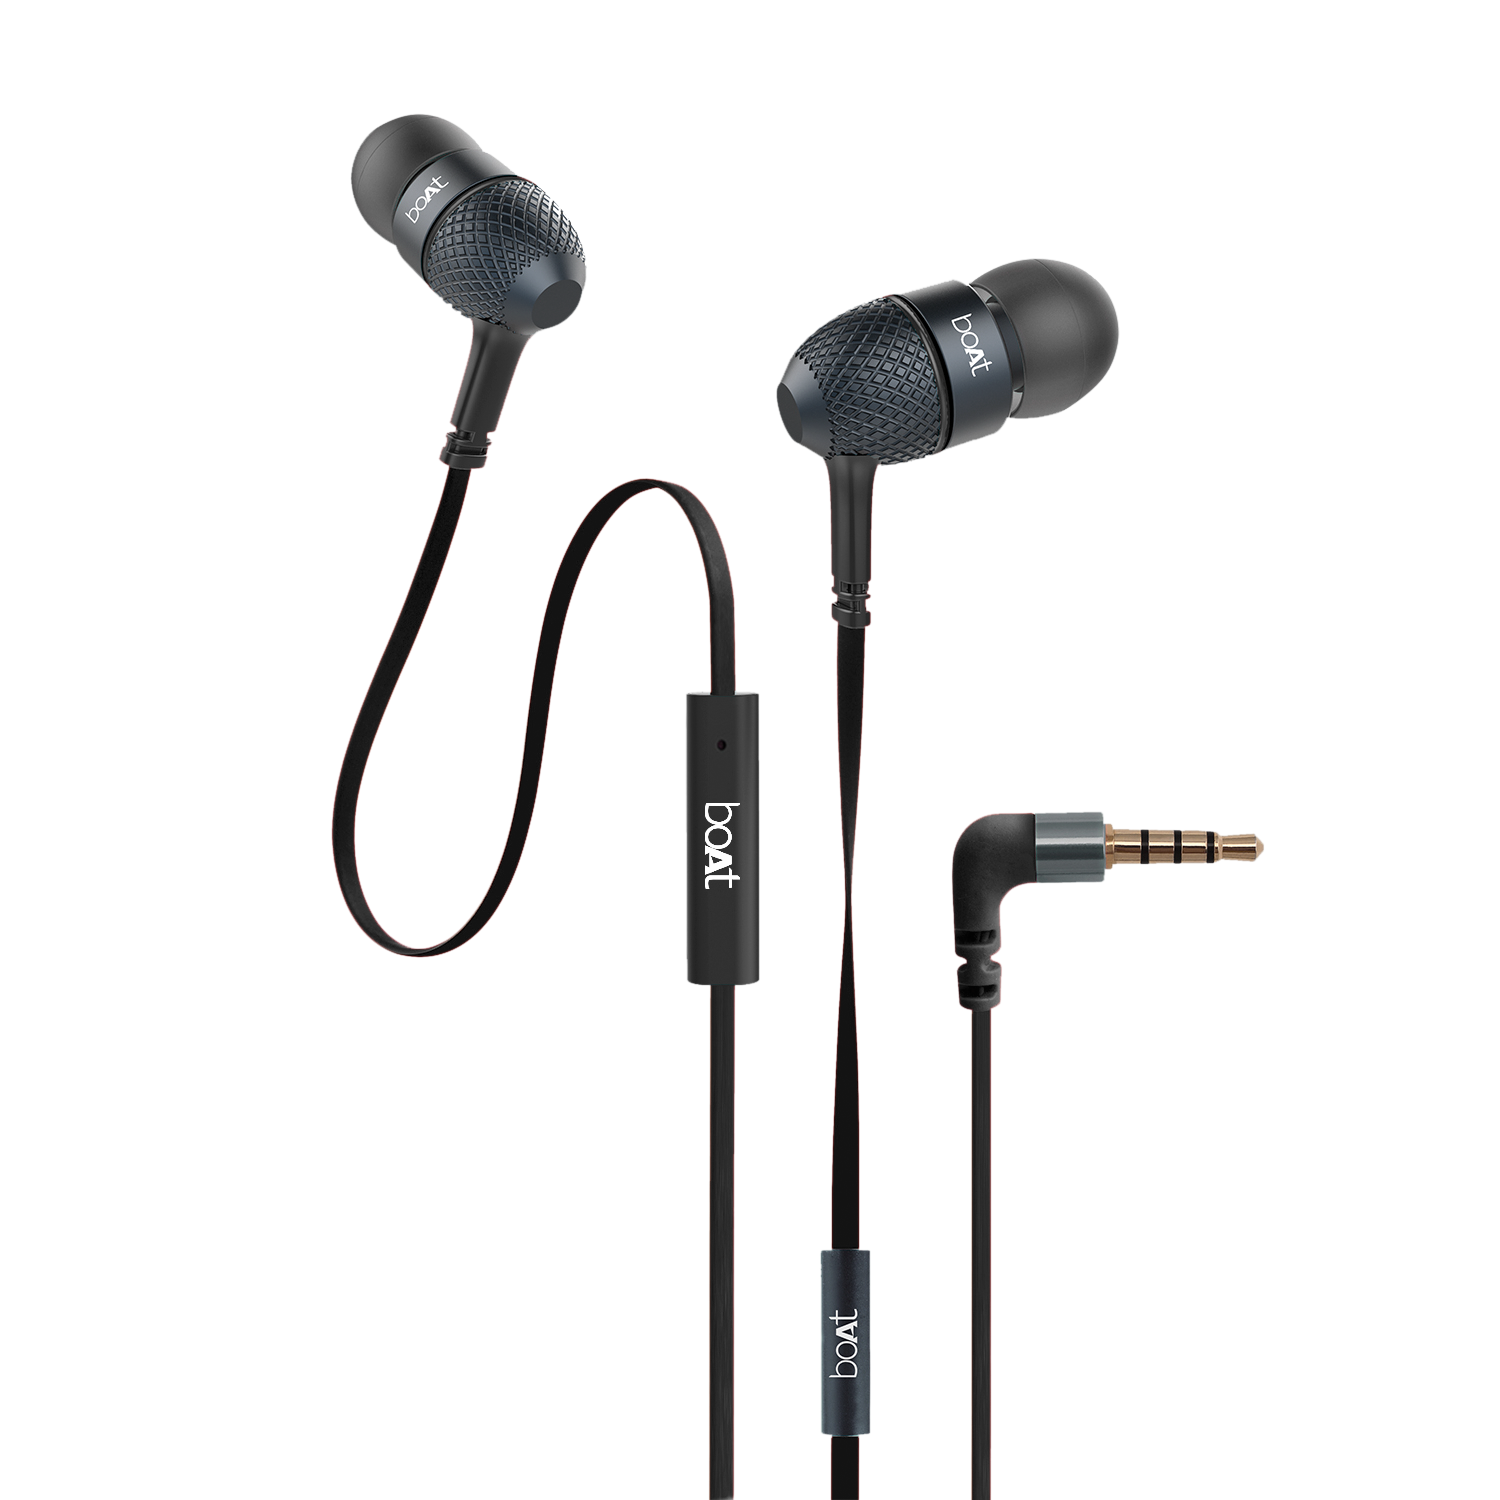 Bassheads 225 | Wired Earphone having 10mm Driver, Passive Noise Cancellation, Polished Metal Design, Hands-free communication